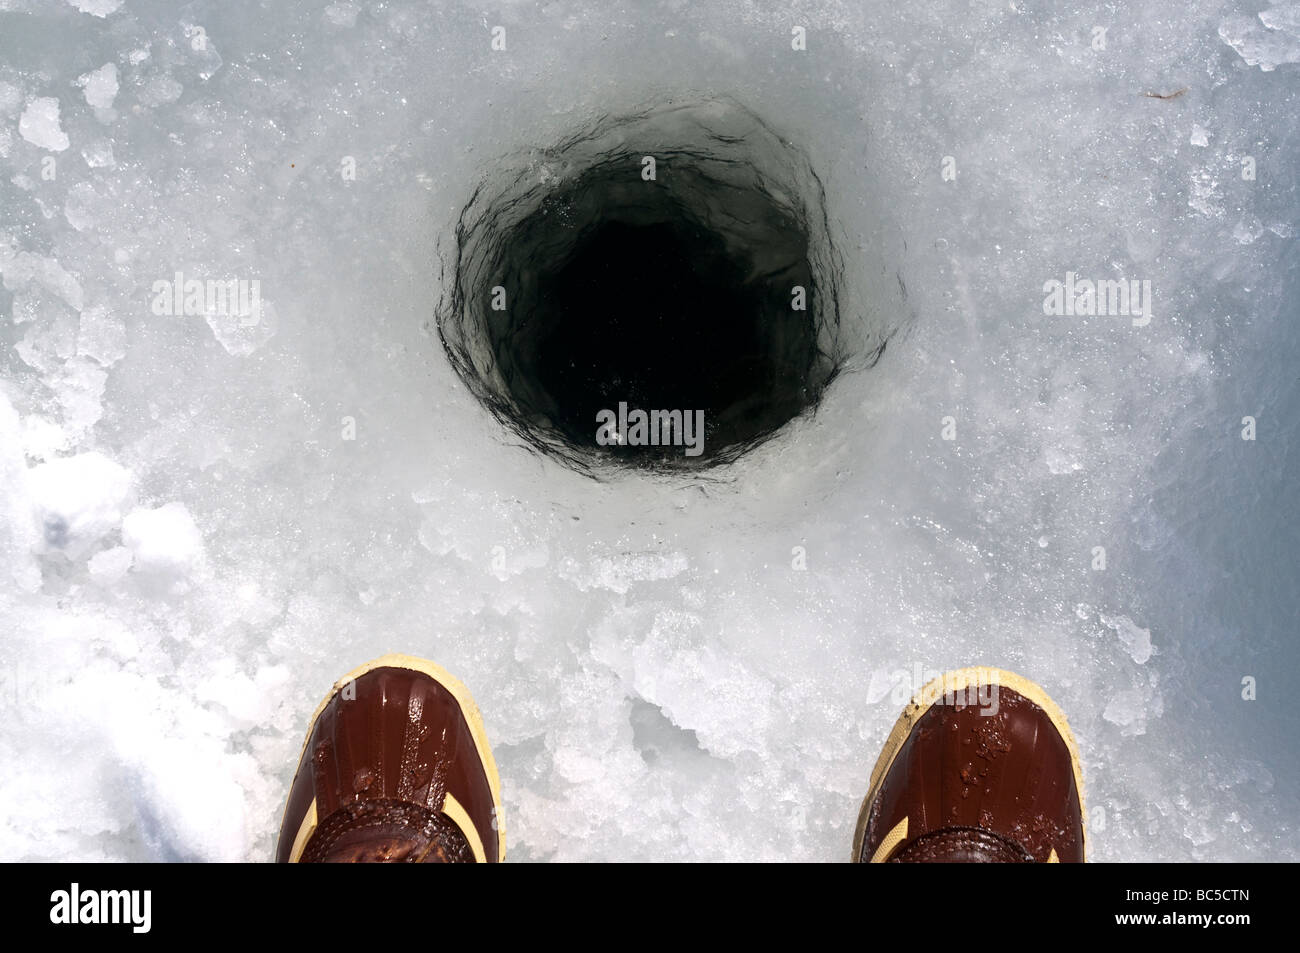 two boots and an ice fishing hole. Stock Photo